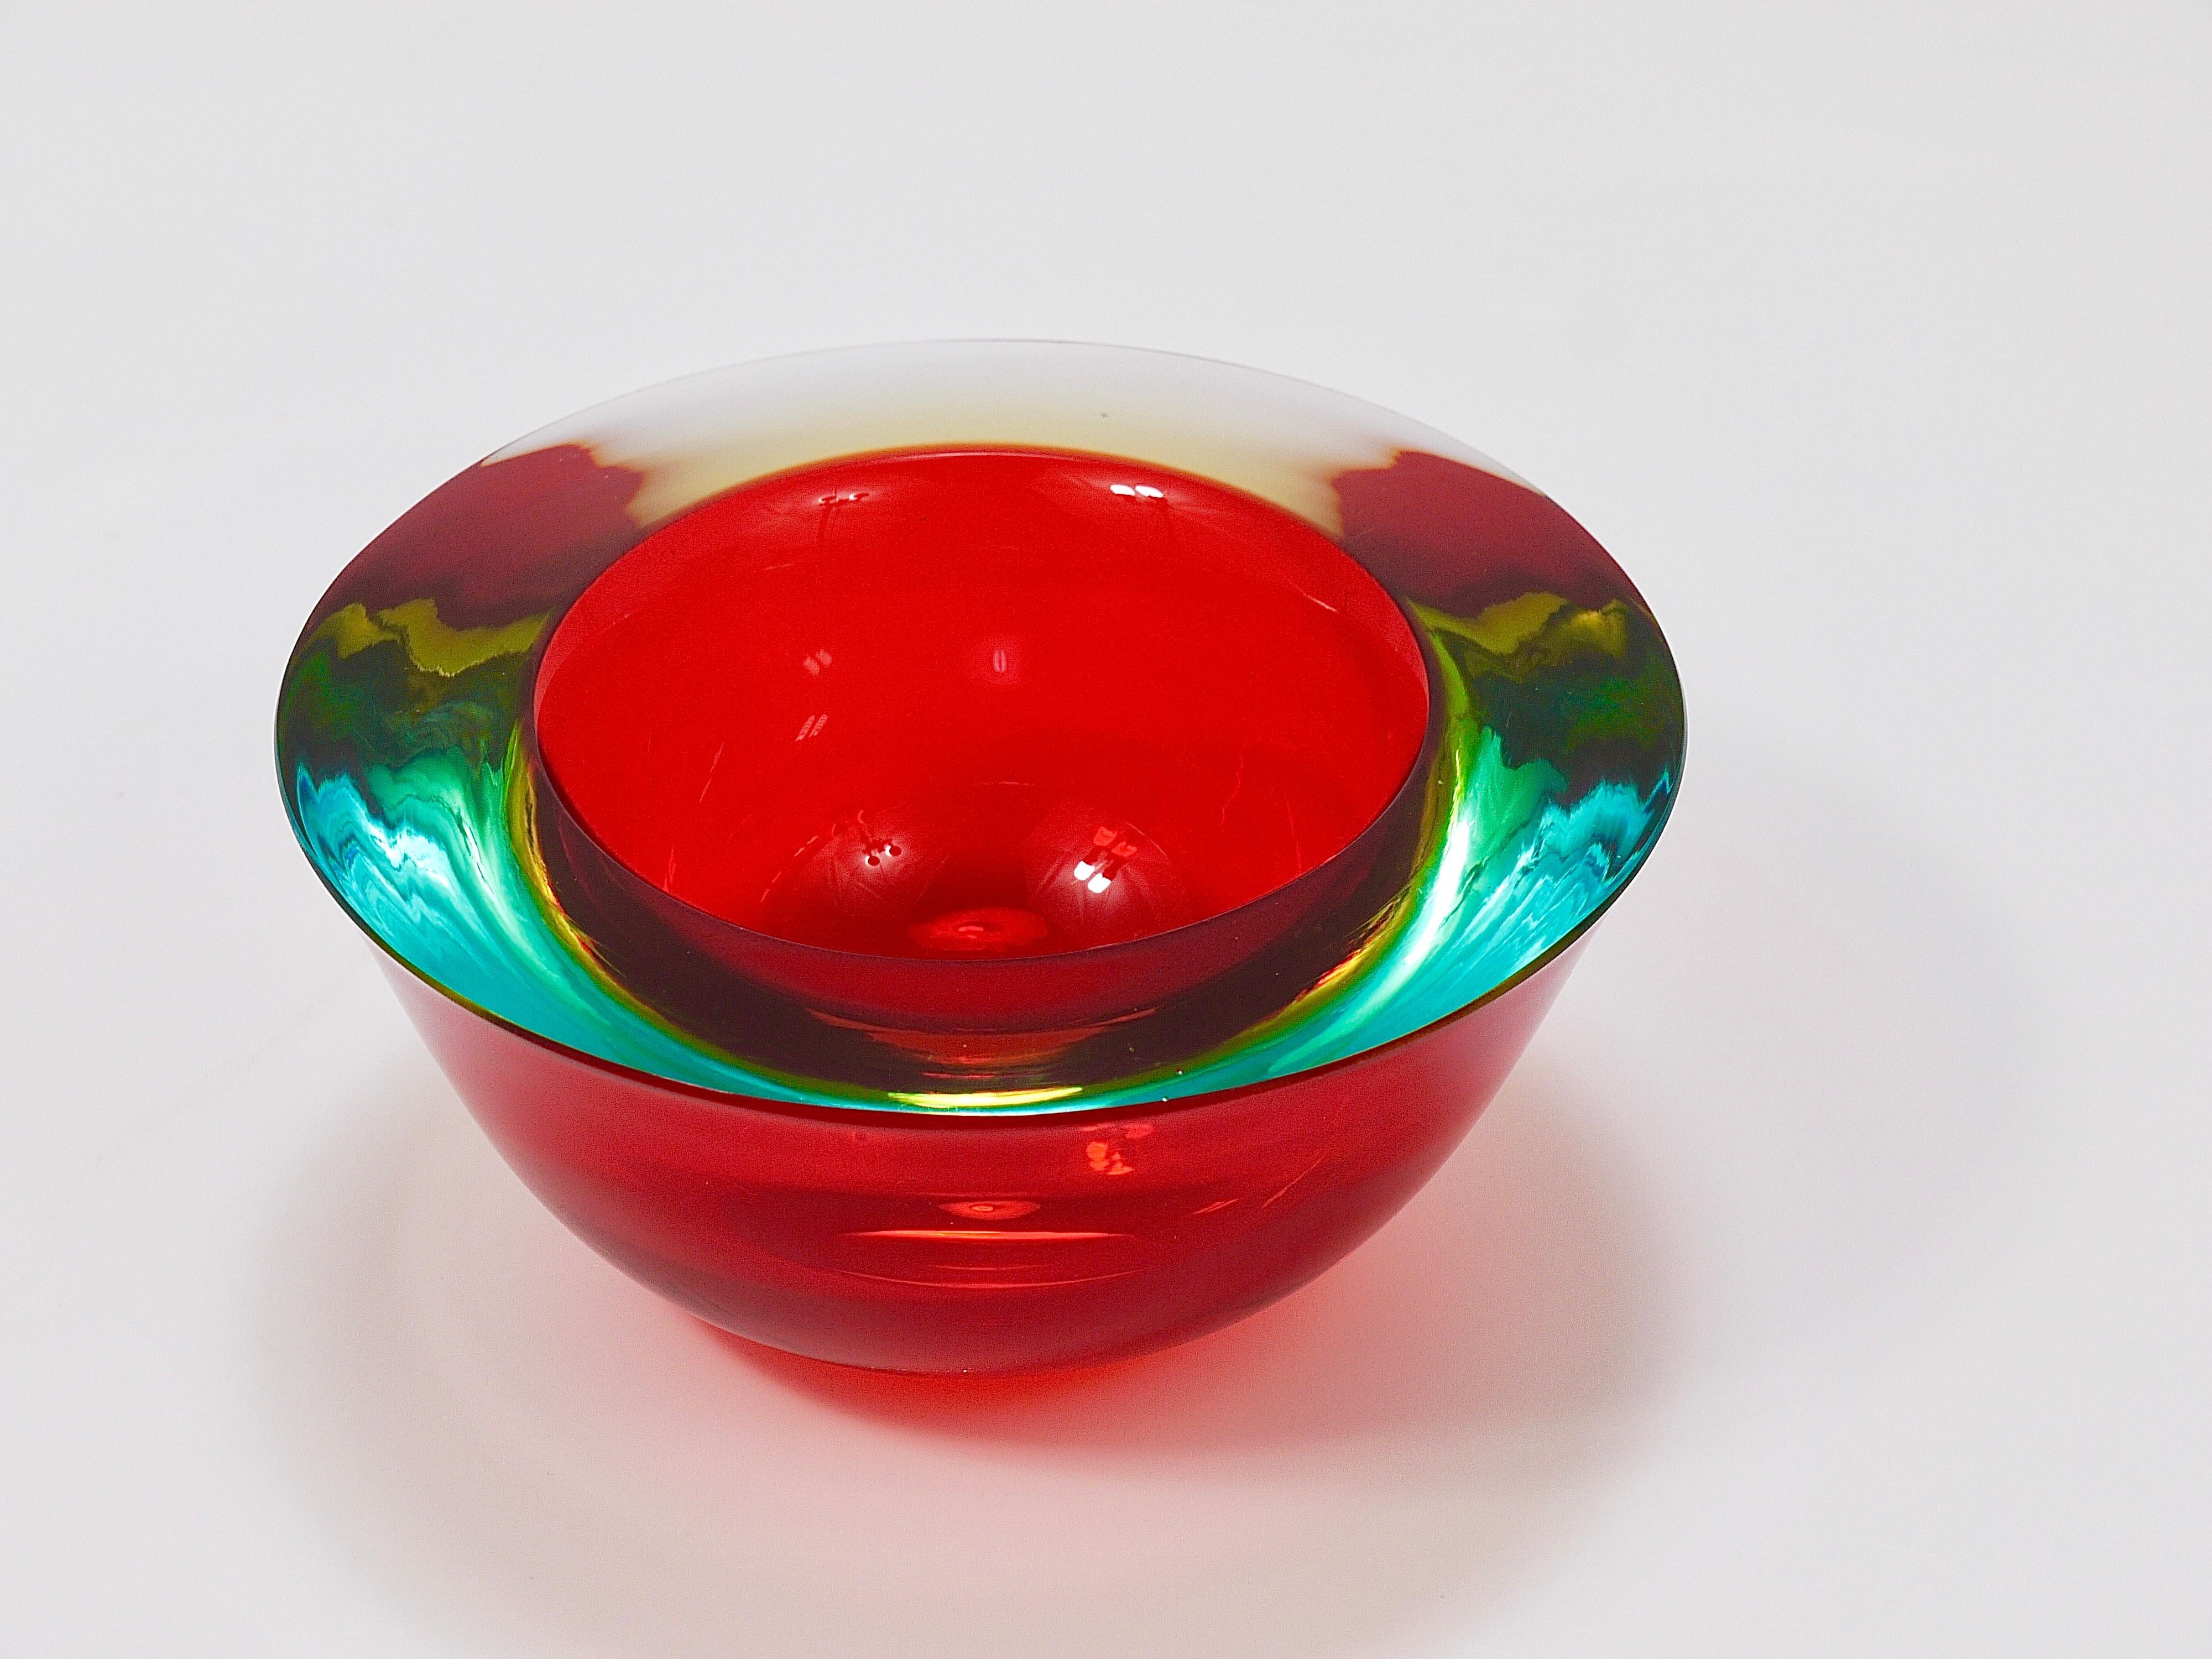 Faceted Flavio Poli Caviar Sommerso Murano Glass Bowl by Seguso, Italy, 1960s For Sale